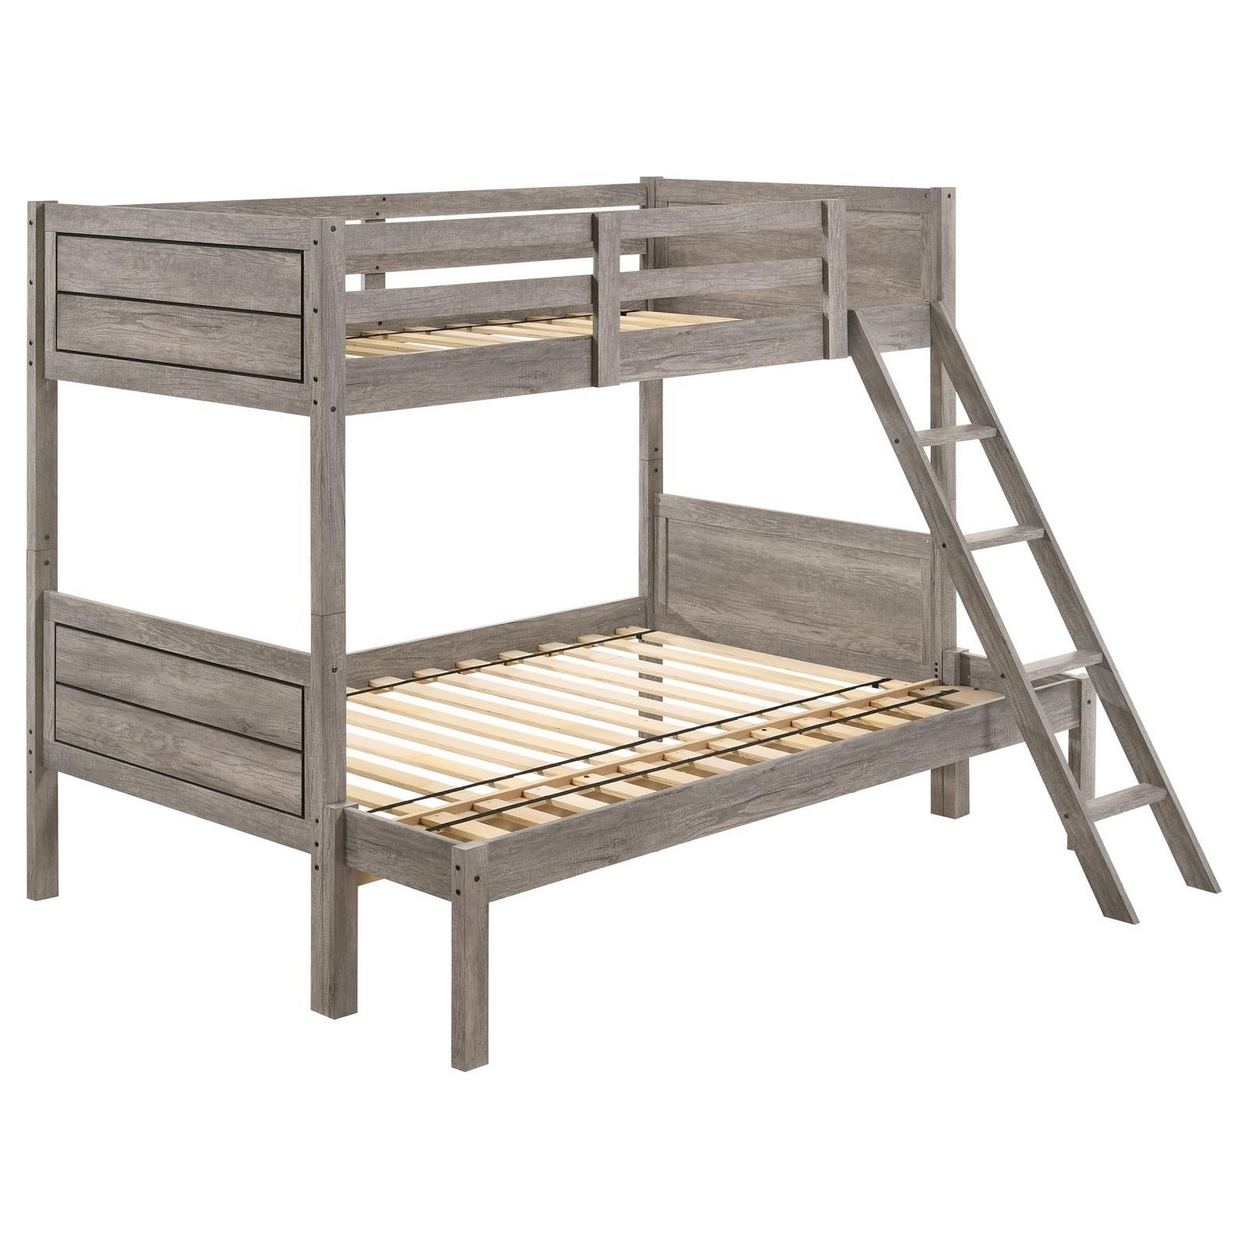 Twin Over Full Bunk Bed Set, Slatted Guard Rails, Weathered Taupe Wood-Saltoro Sherpi